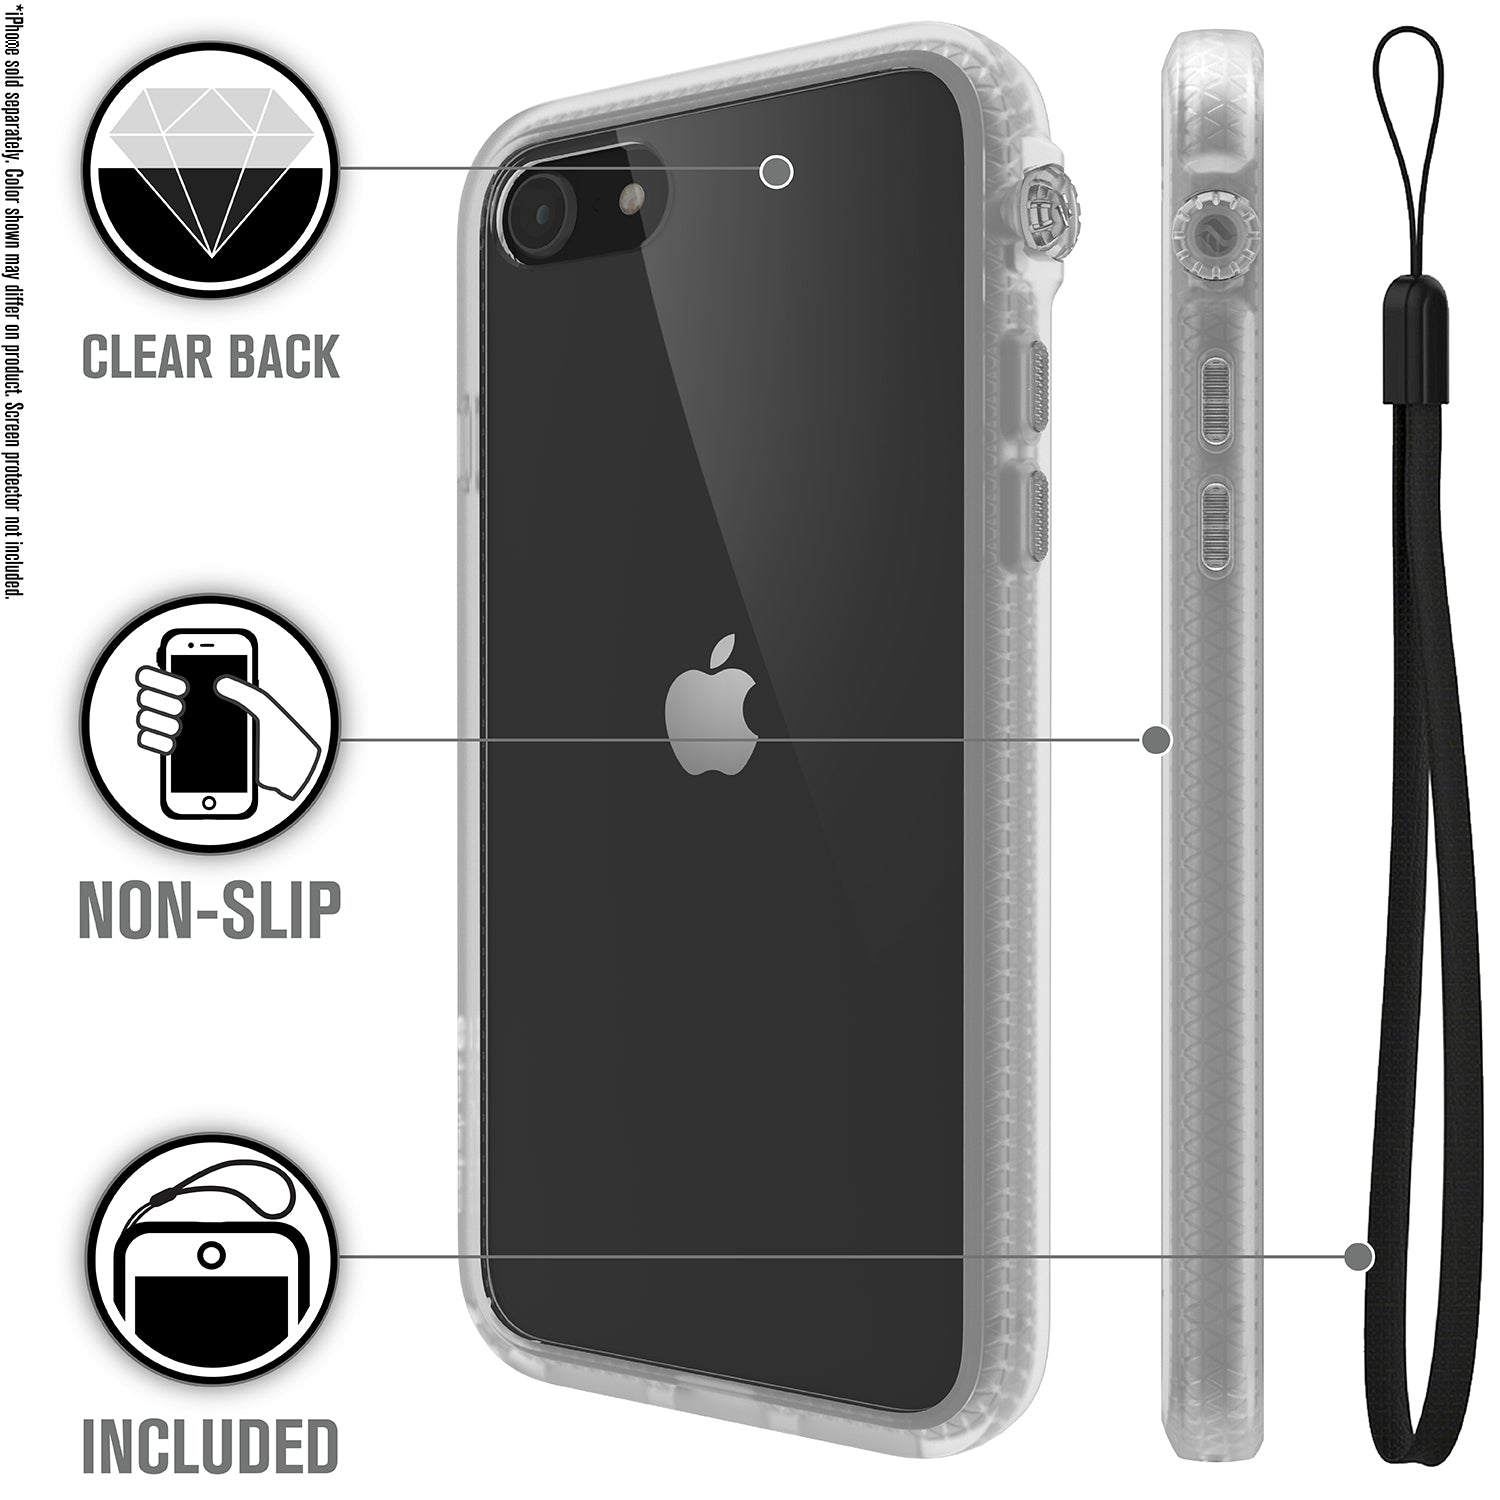 Catalyst iphone 8/7 impact protection case showing the case features with lanyard in a clear colorway text reads clear back non-slip included